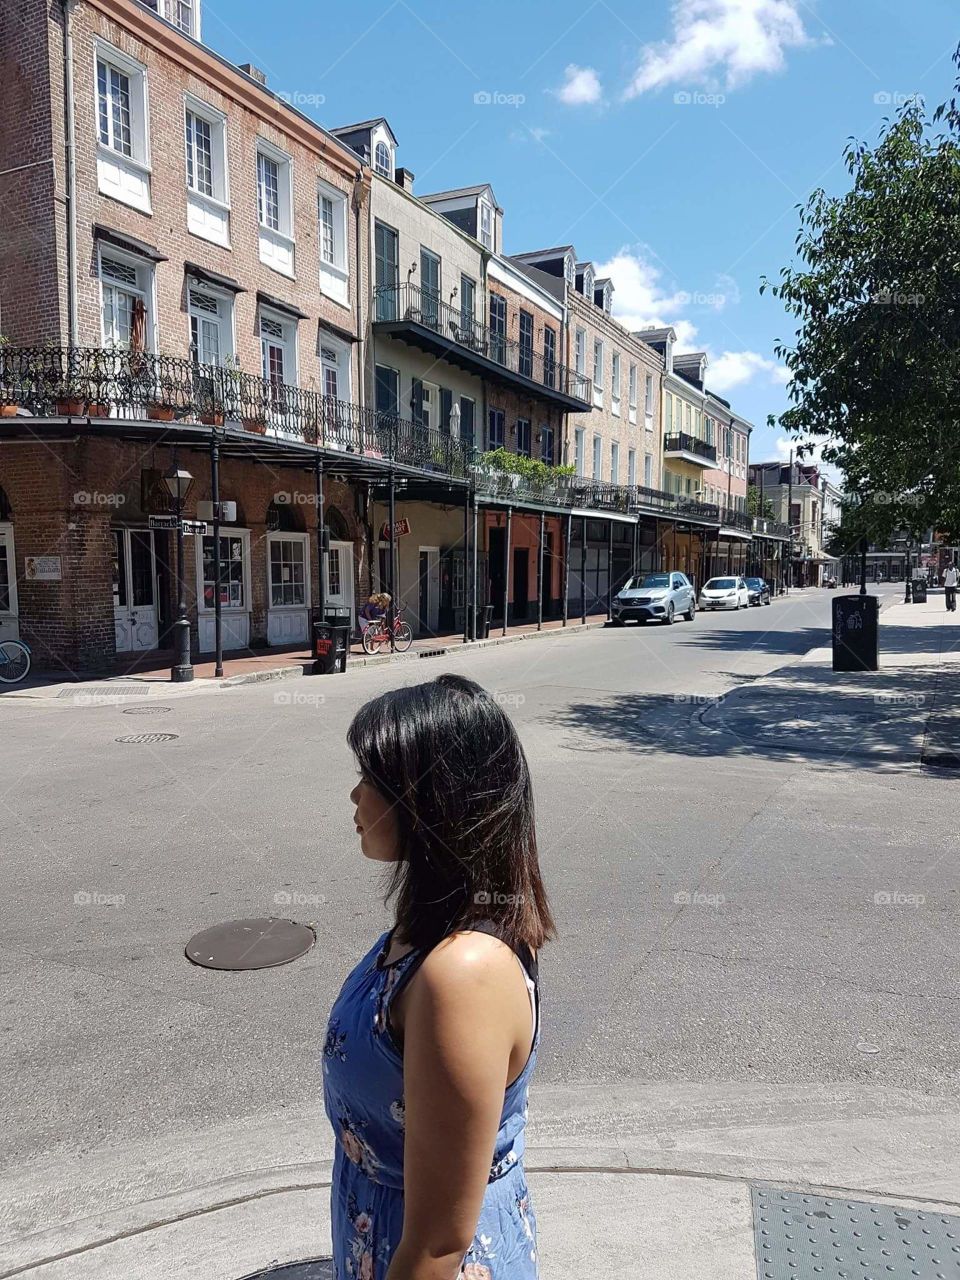 A day in New Orleans